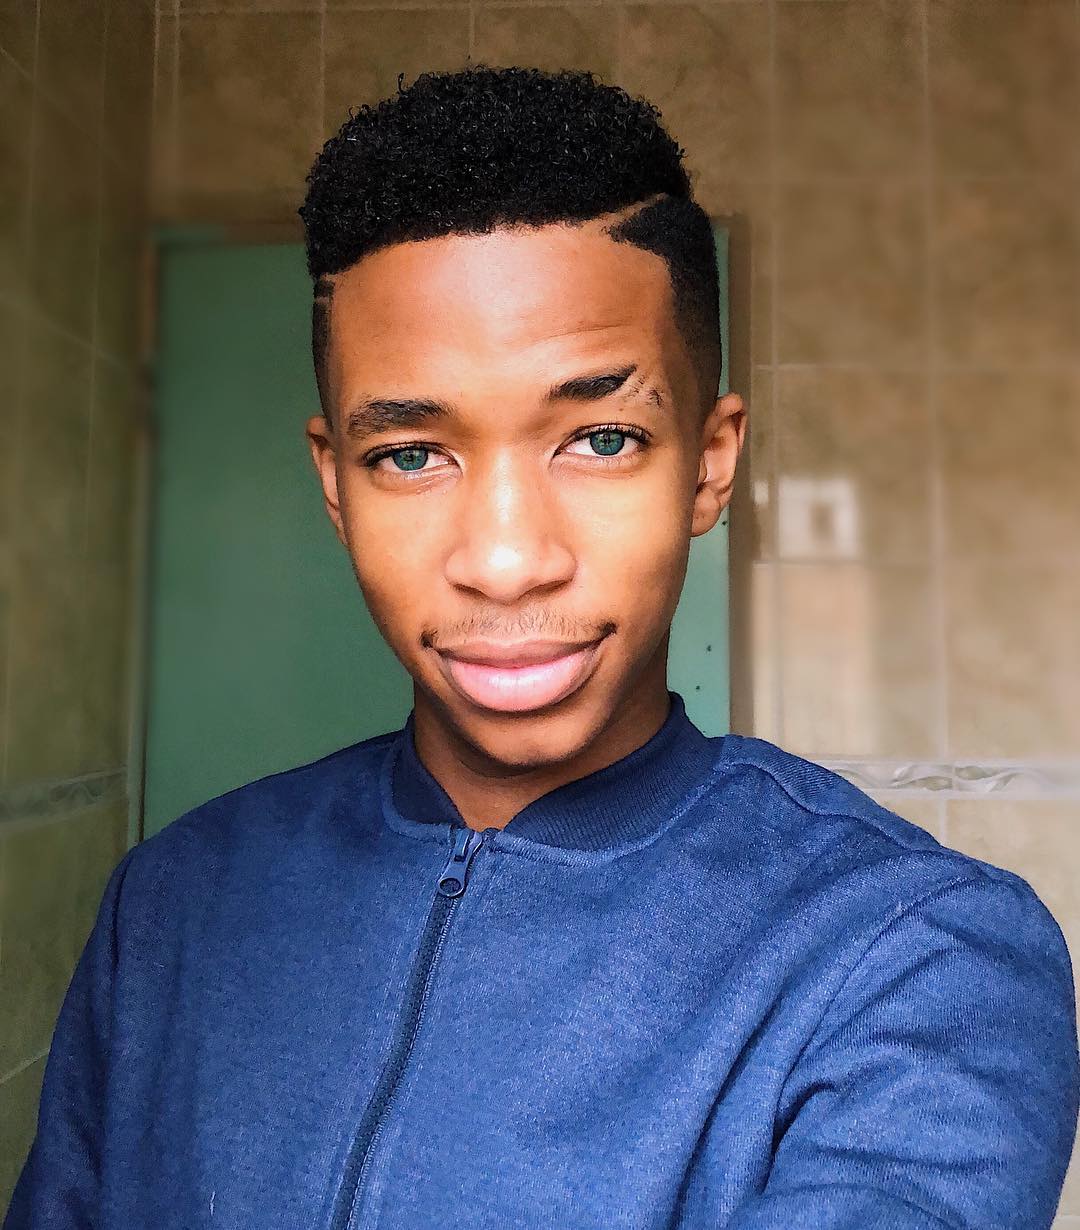 Lasizwe lands his own reality show